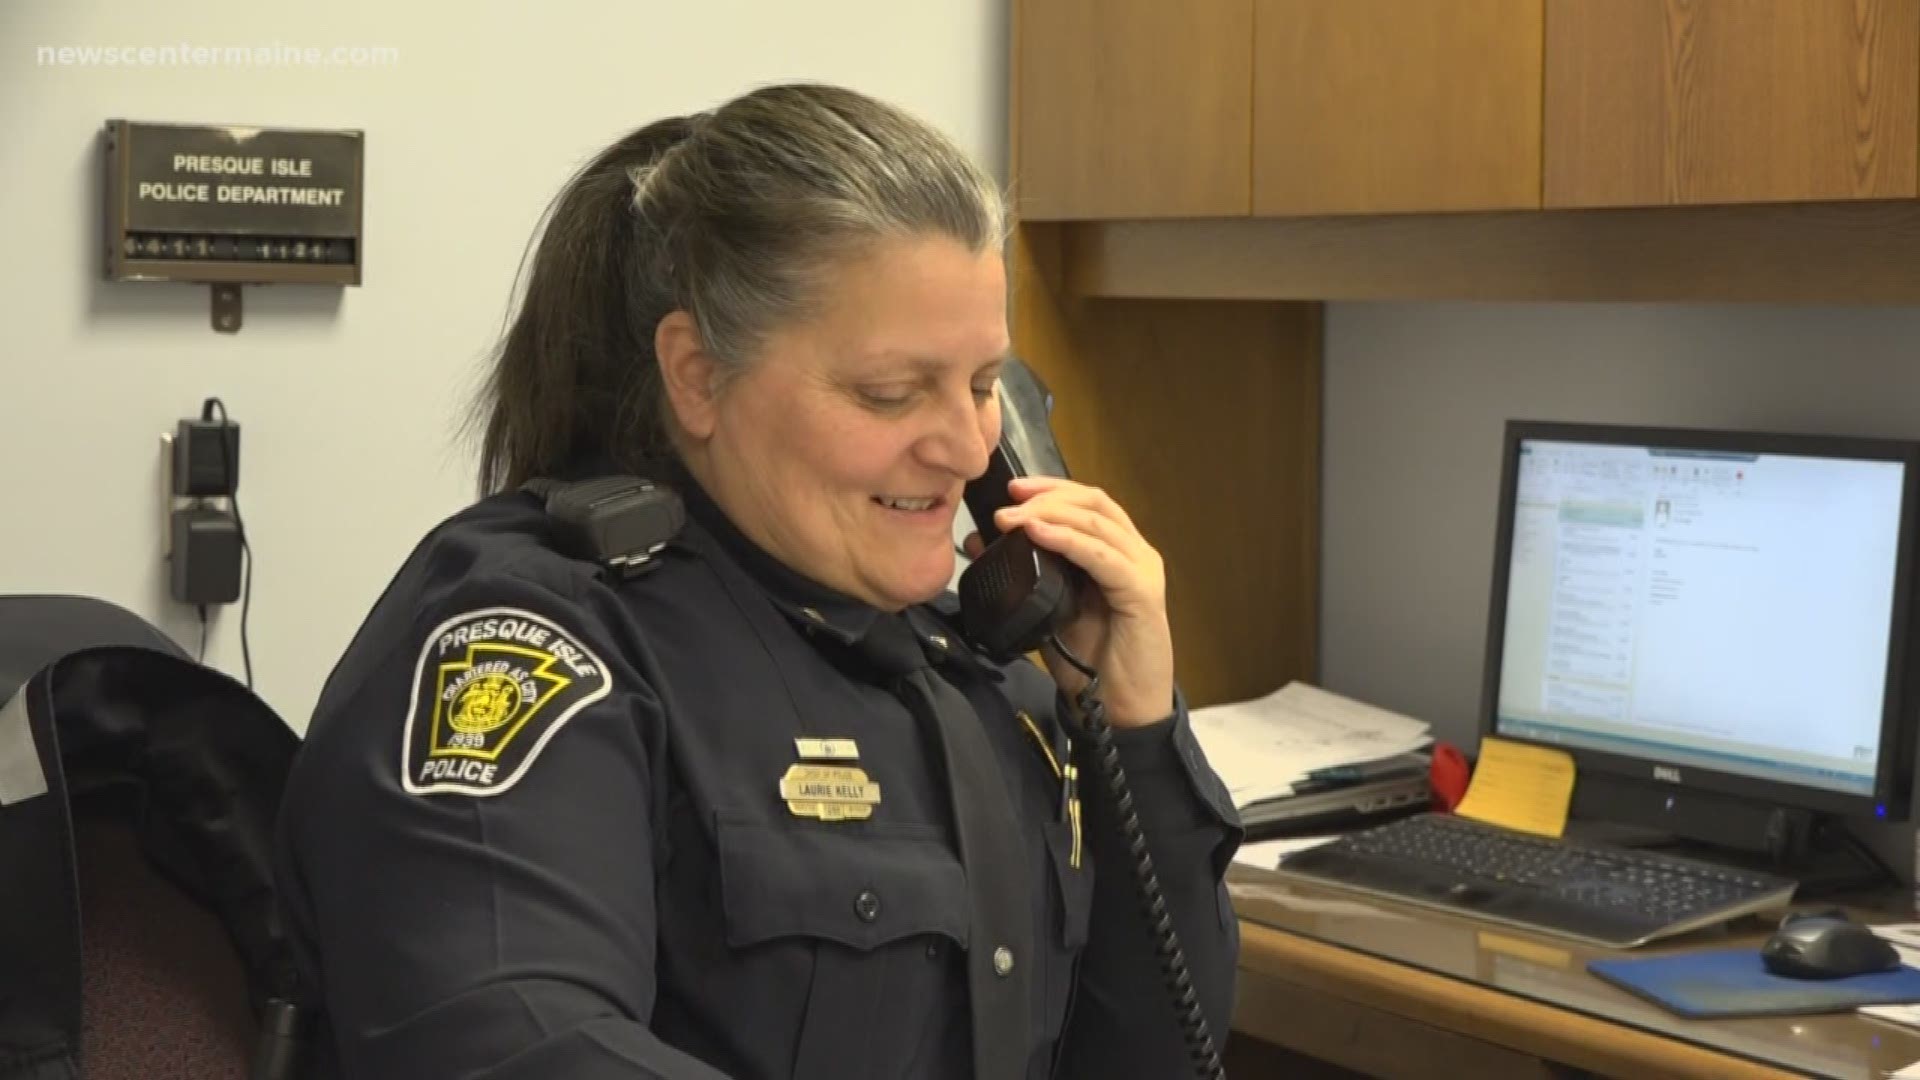 Laurie Kelly is the first woman to hold the office of police chief in Presque Isle